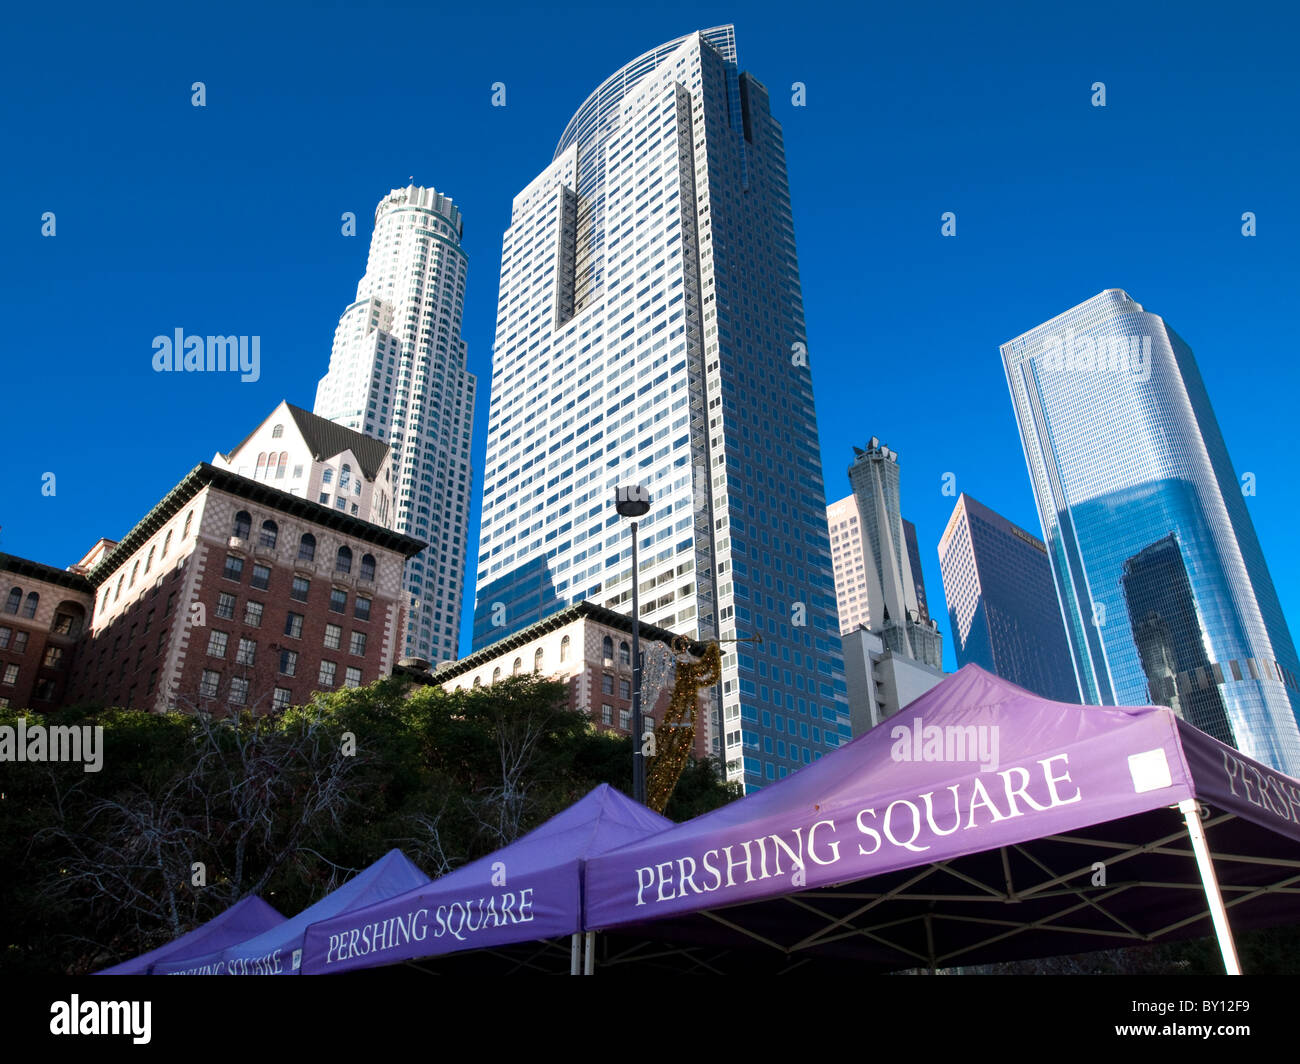 Pershing Square / Gas Company Tower Stock Photo